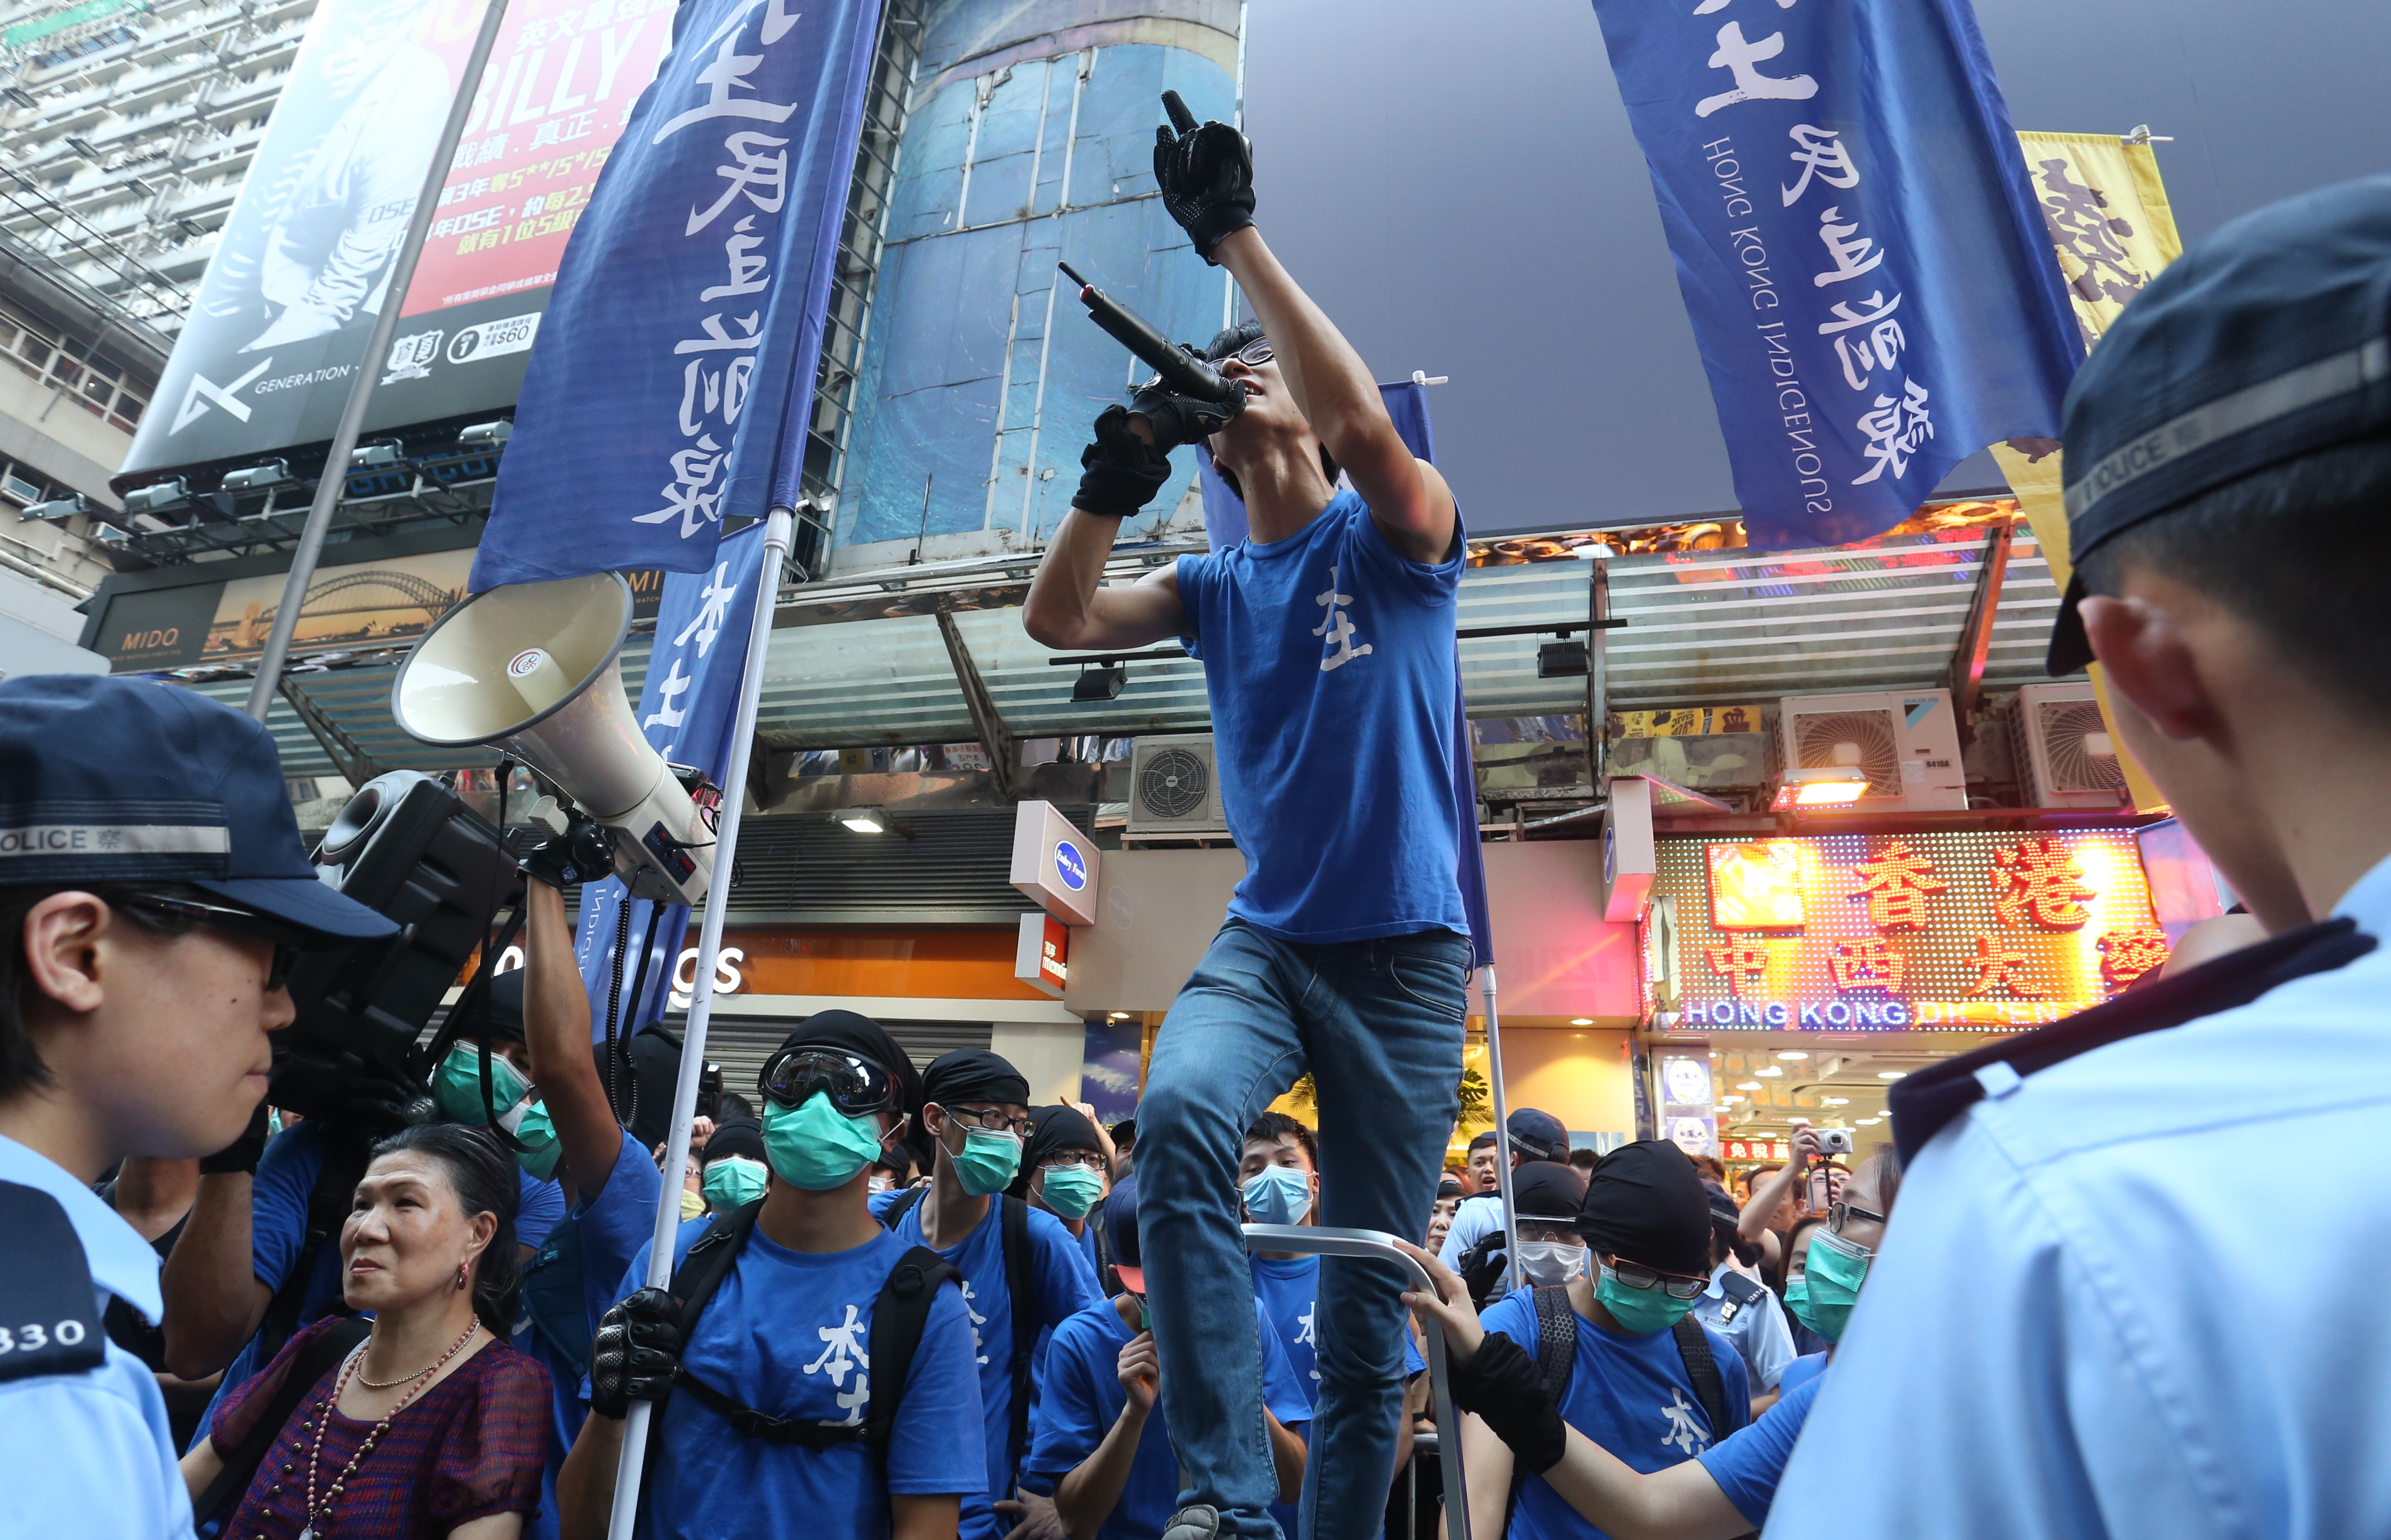 A member of localist group Hong Kong Indigenous speaks at a rally in Mong Kok. What exactly is localism? What are localist groups’ goals and interests and how are they different from those of the pro-establishment camp’s? Photo: Dickson Lee